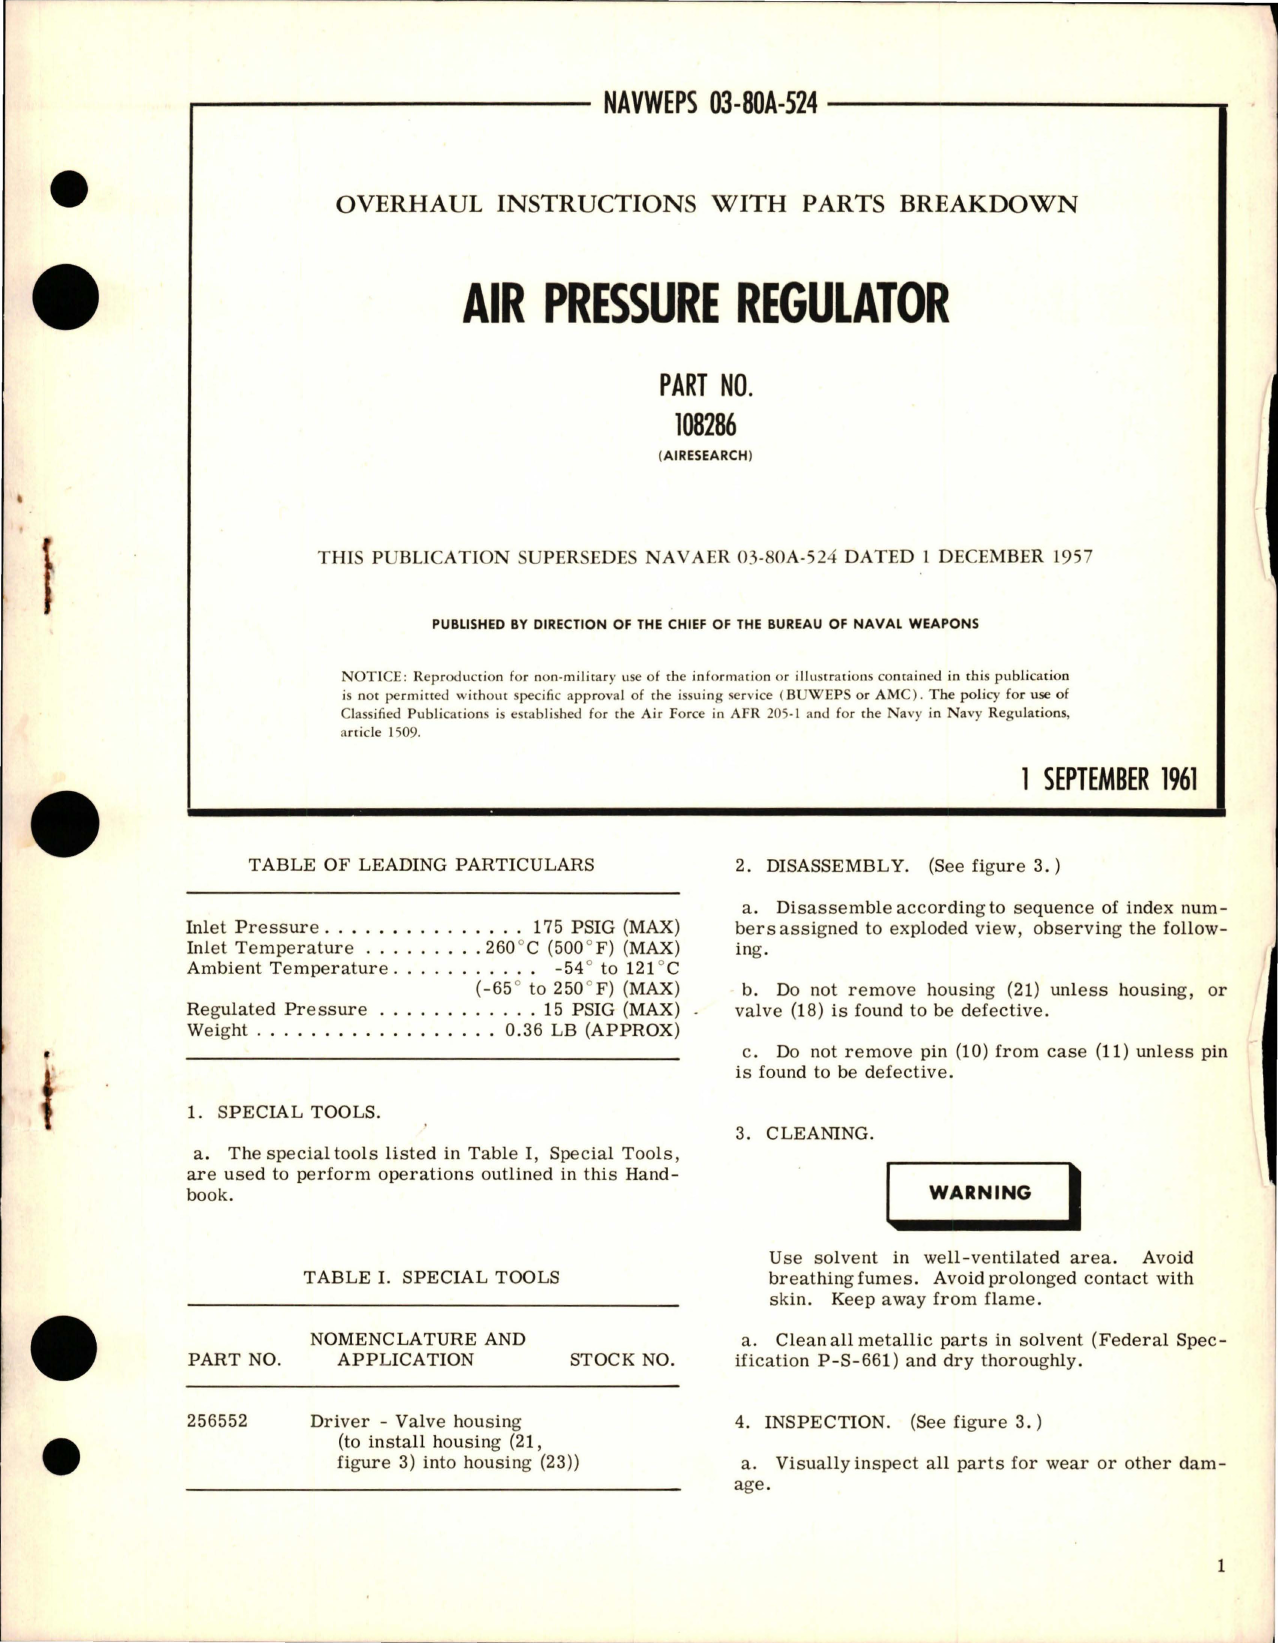 Sample page 1 from AirCorps Library document: Overhaul Instructions w Parts Breakdown for Air Pressure Regulator - Part 108286